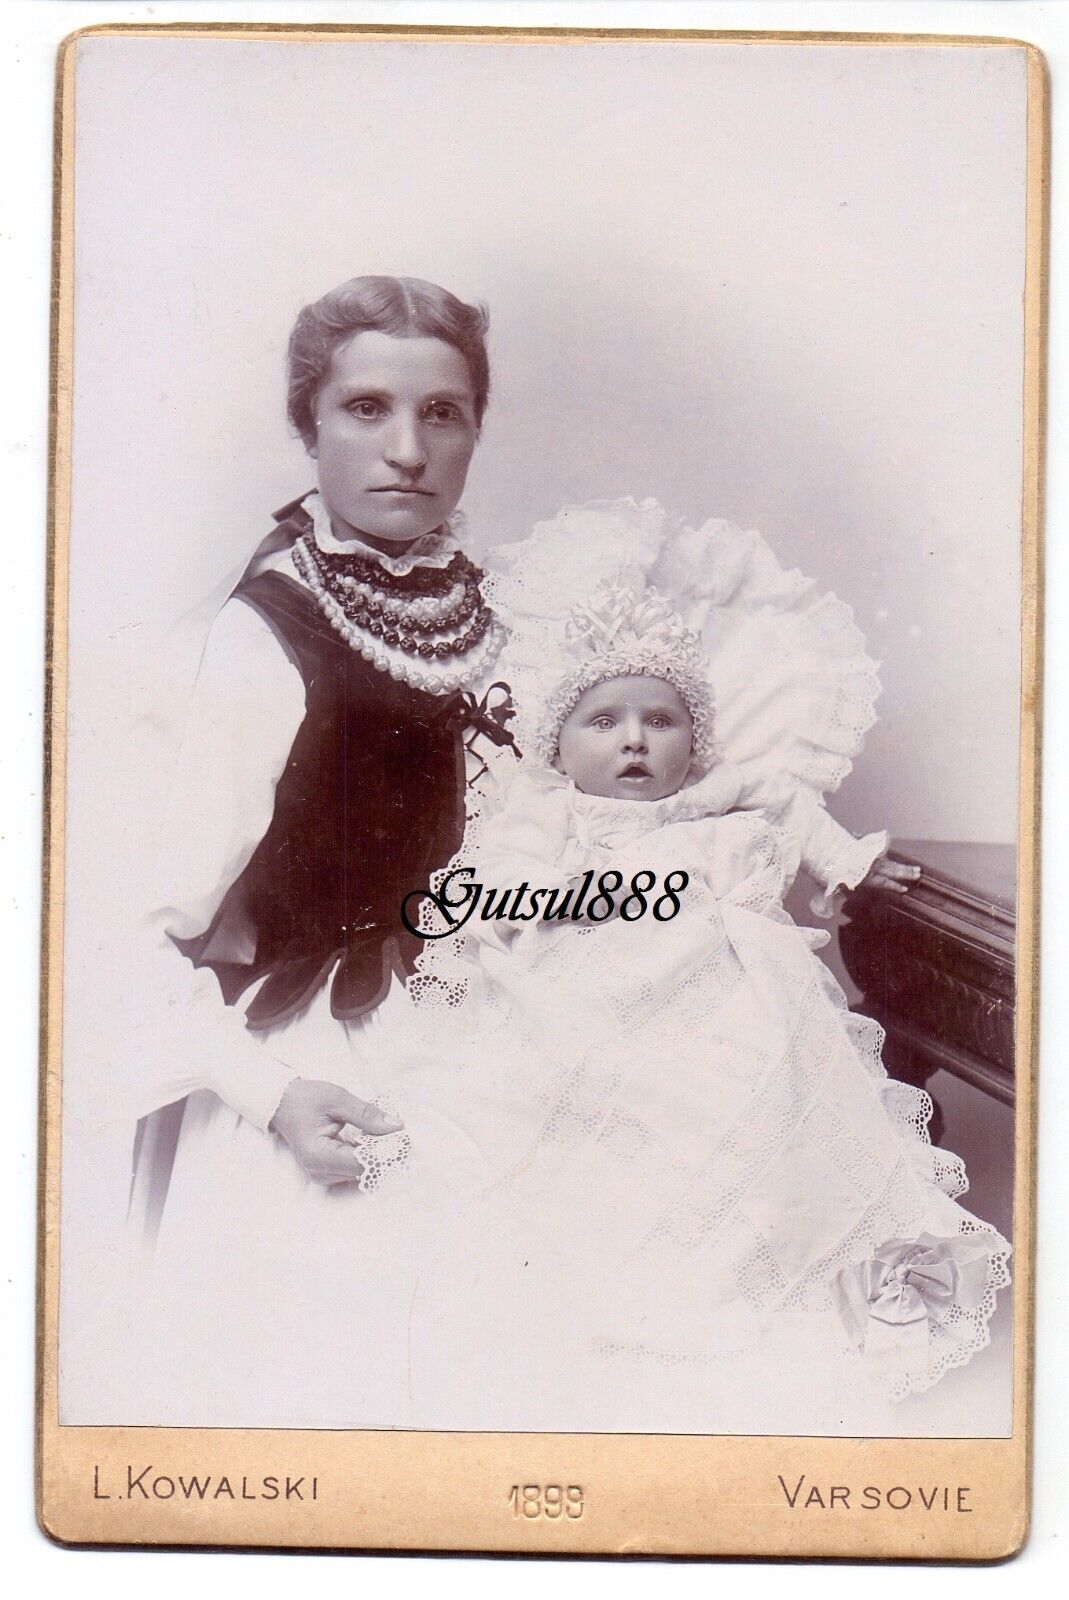 Hired breastfeeding mother. Cabinet Card. Warsaw (Poland). 1899.